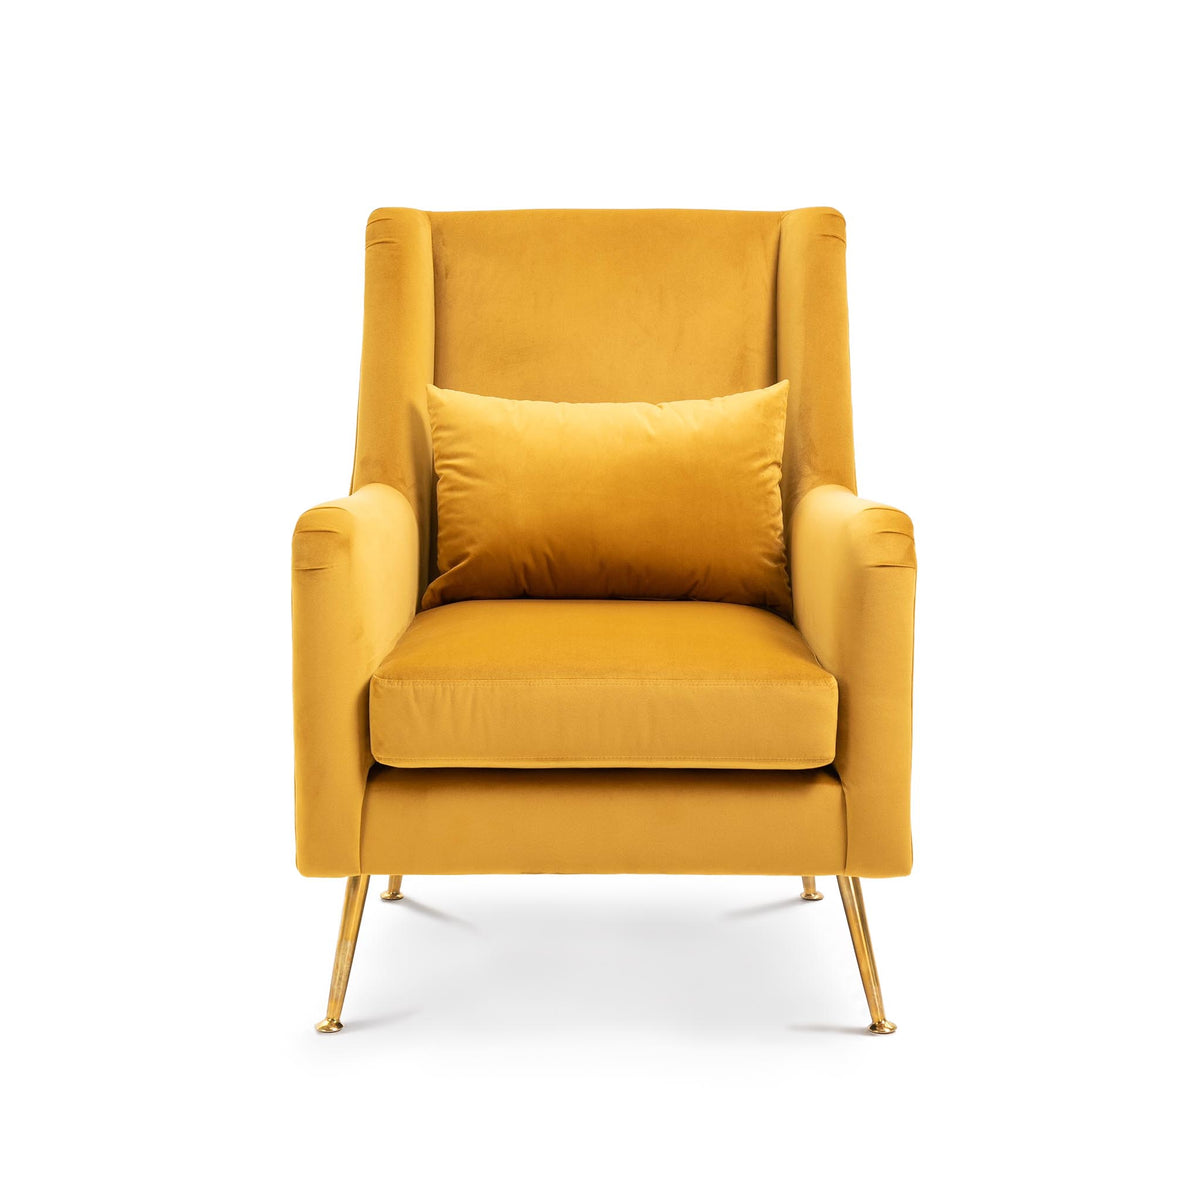 front view of the Mustard Yellow Velvet Wingback Armchair